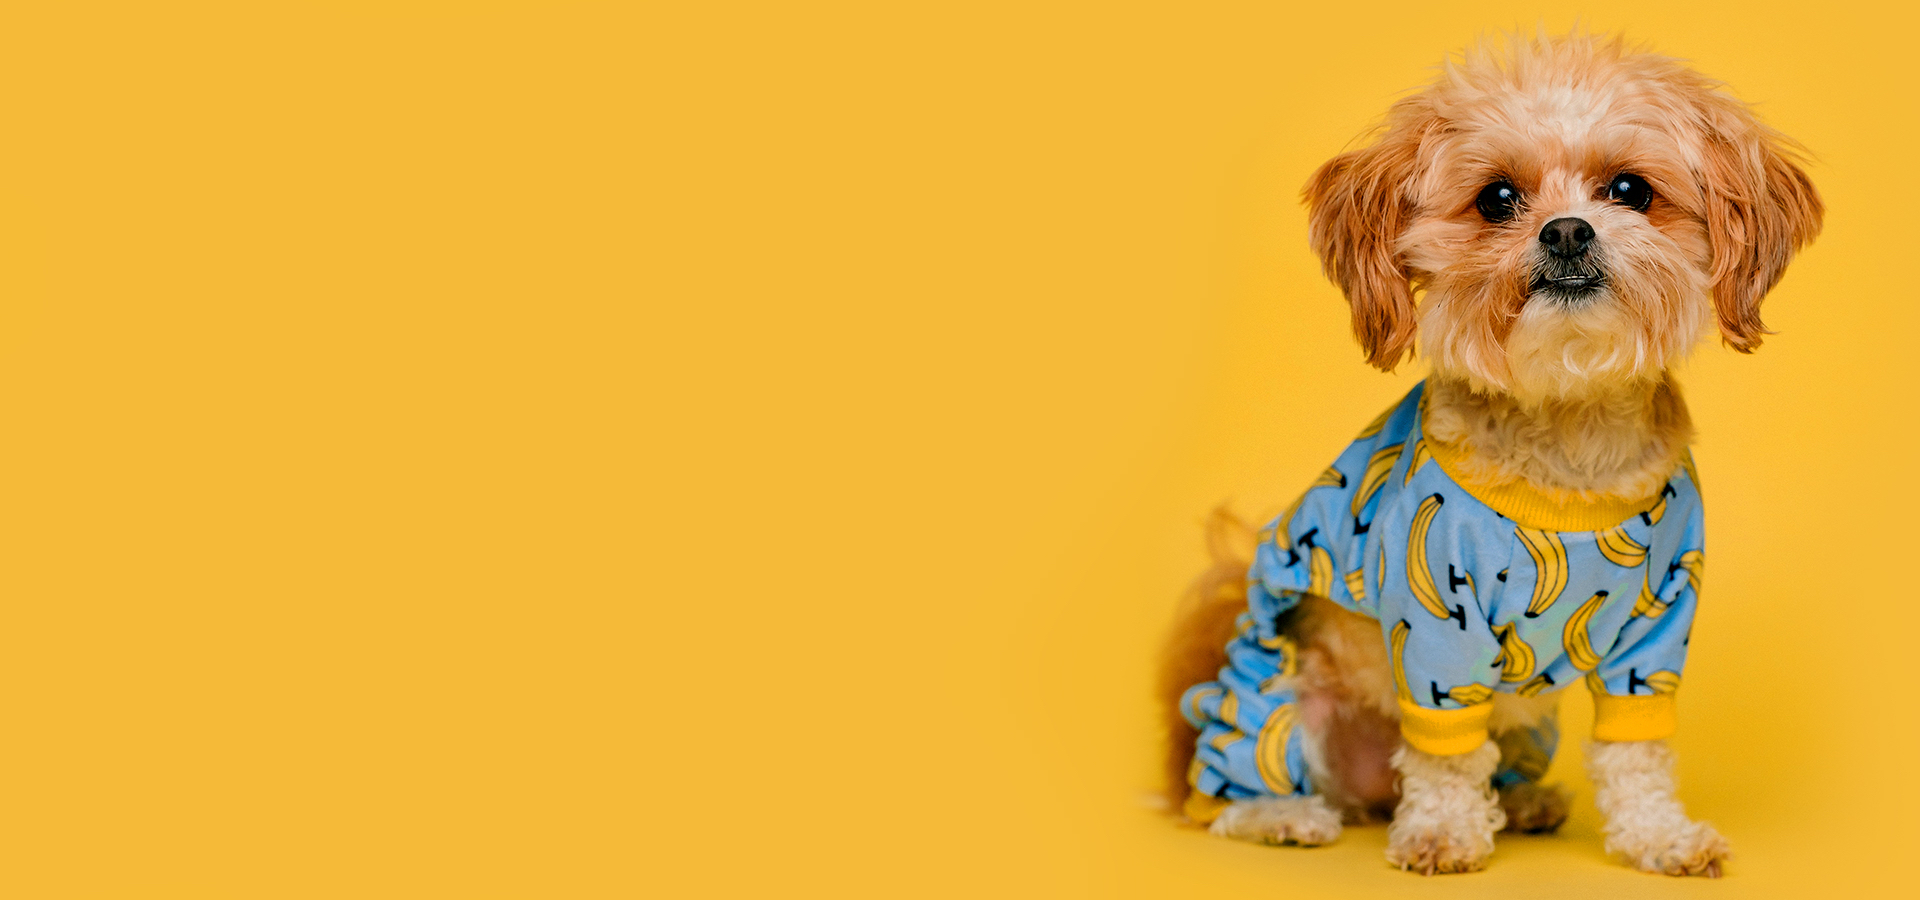 Dog with banana clothes on yellow background